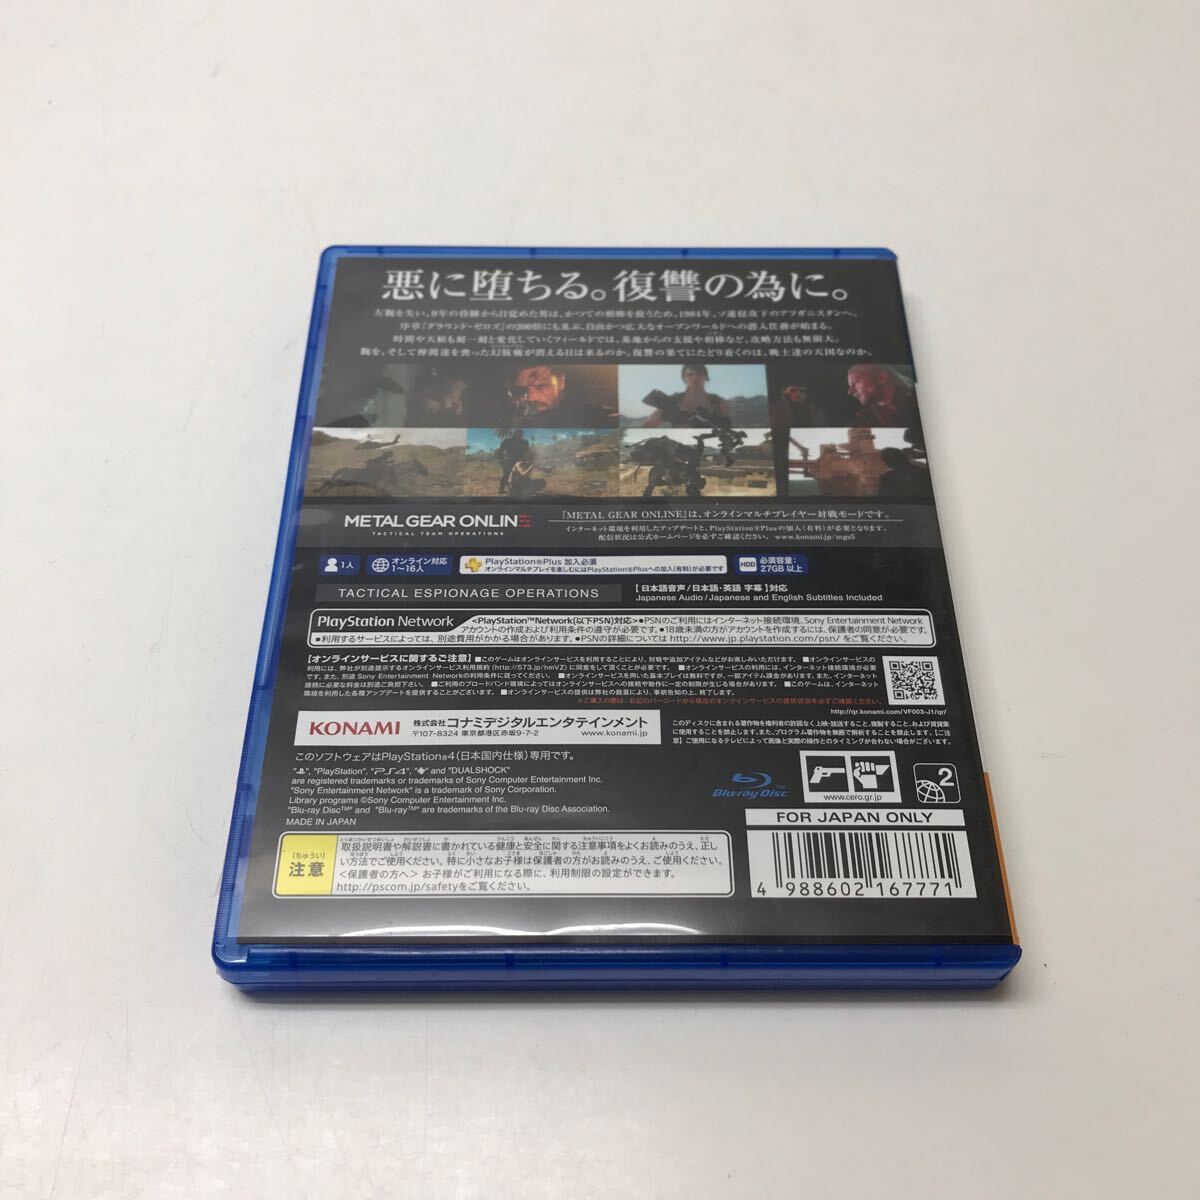 A375★Ps4ソフトMETAL GEAR SOLID V THE PHANTOM PAIN【動作品】の画像4